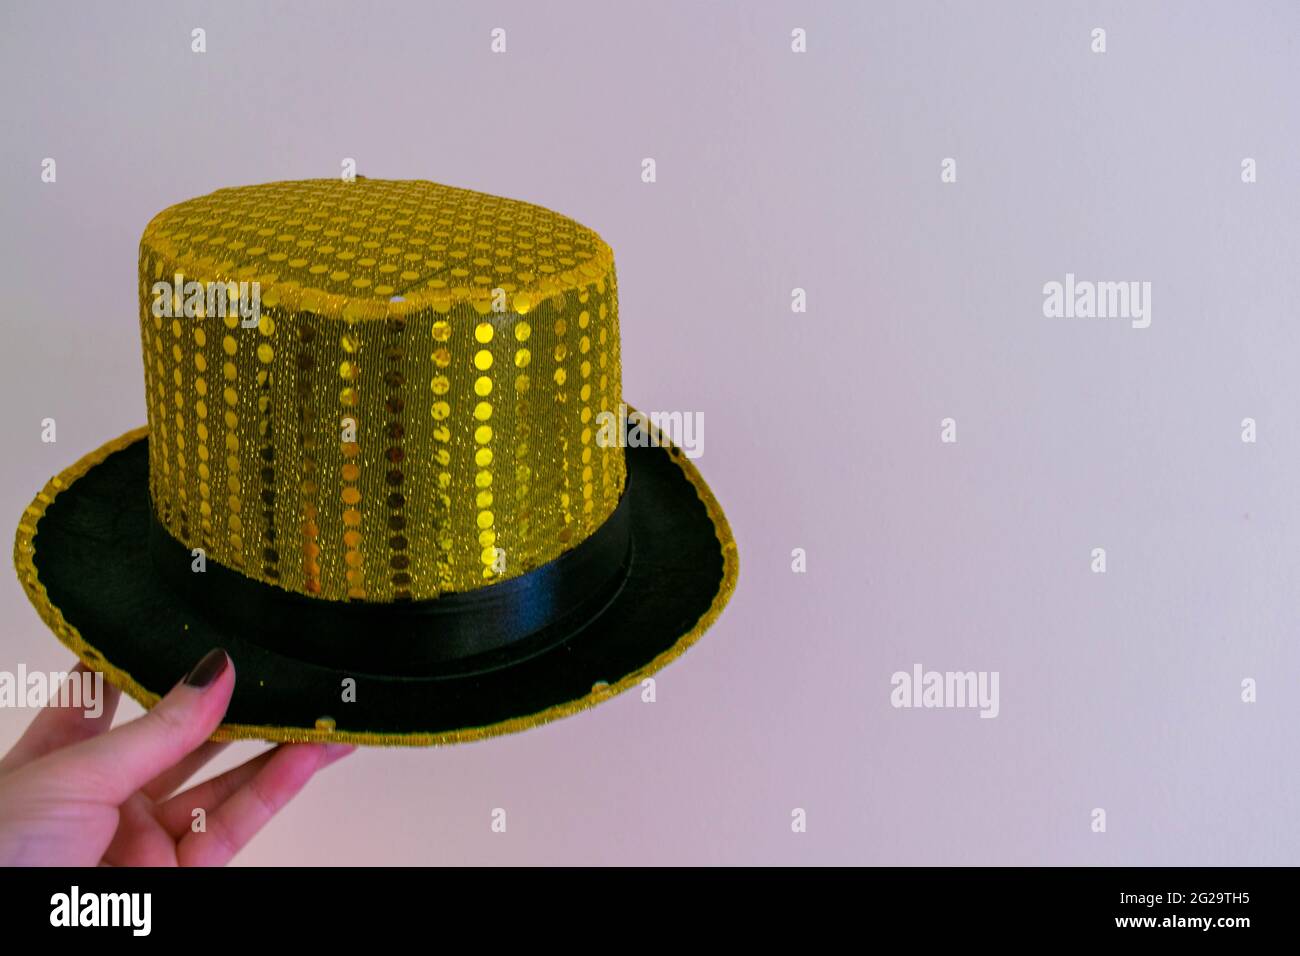 Magic gold yellow sequined top hat on isolated background with space for copy text. Magicians performance show, magic tricks concept background. Fancy Stock Photo